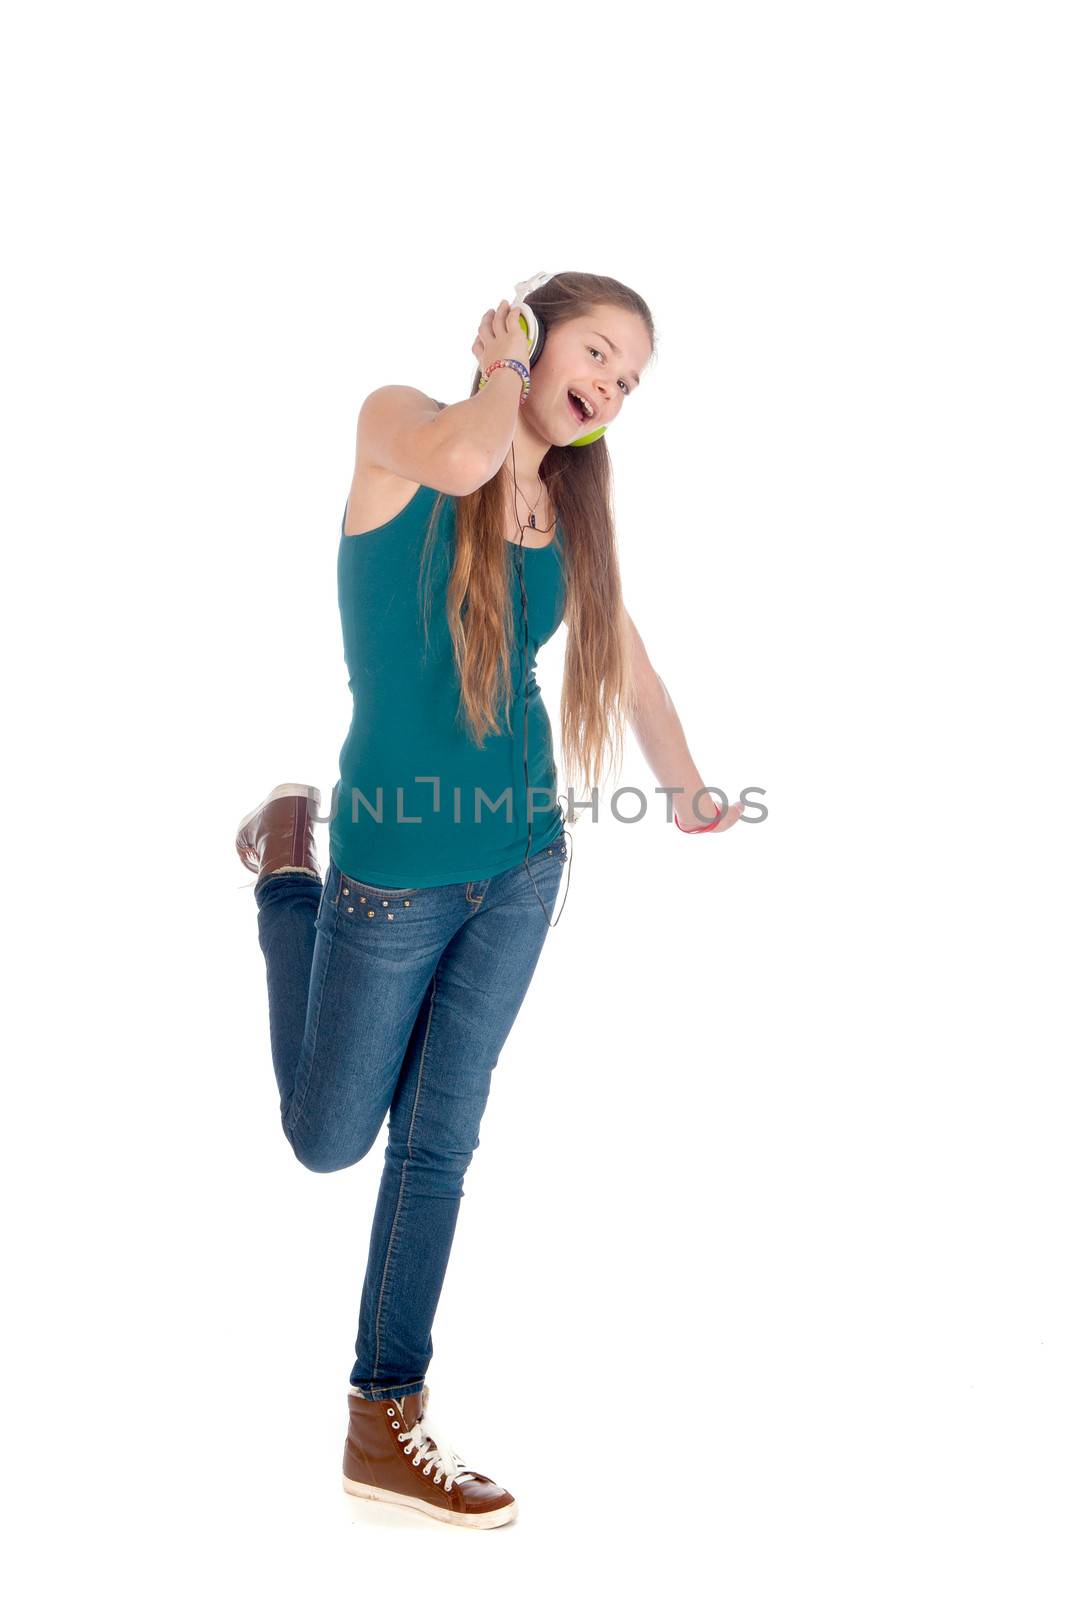 a happy teenager, listen to some music, on a white background